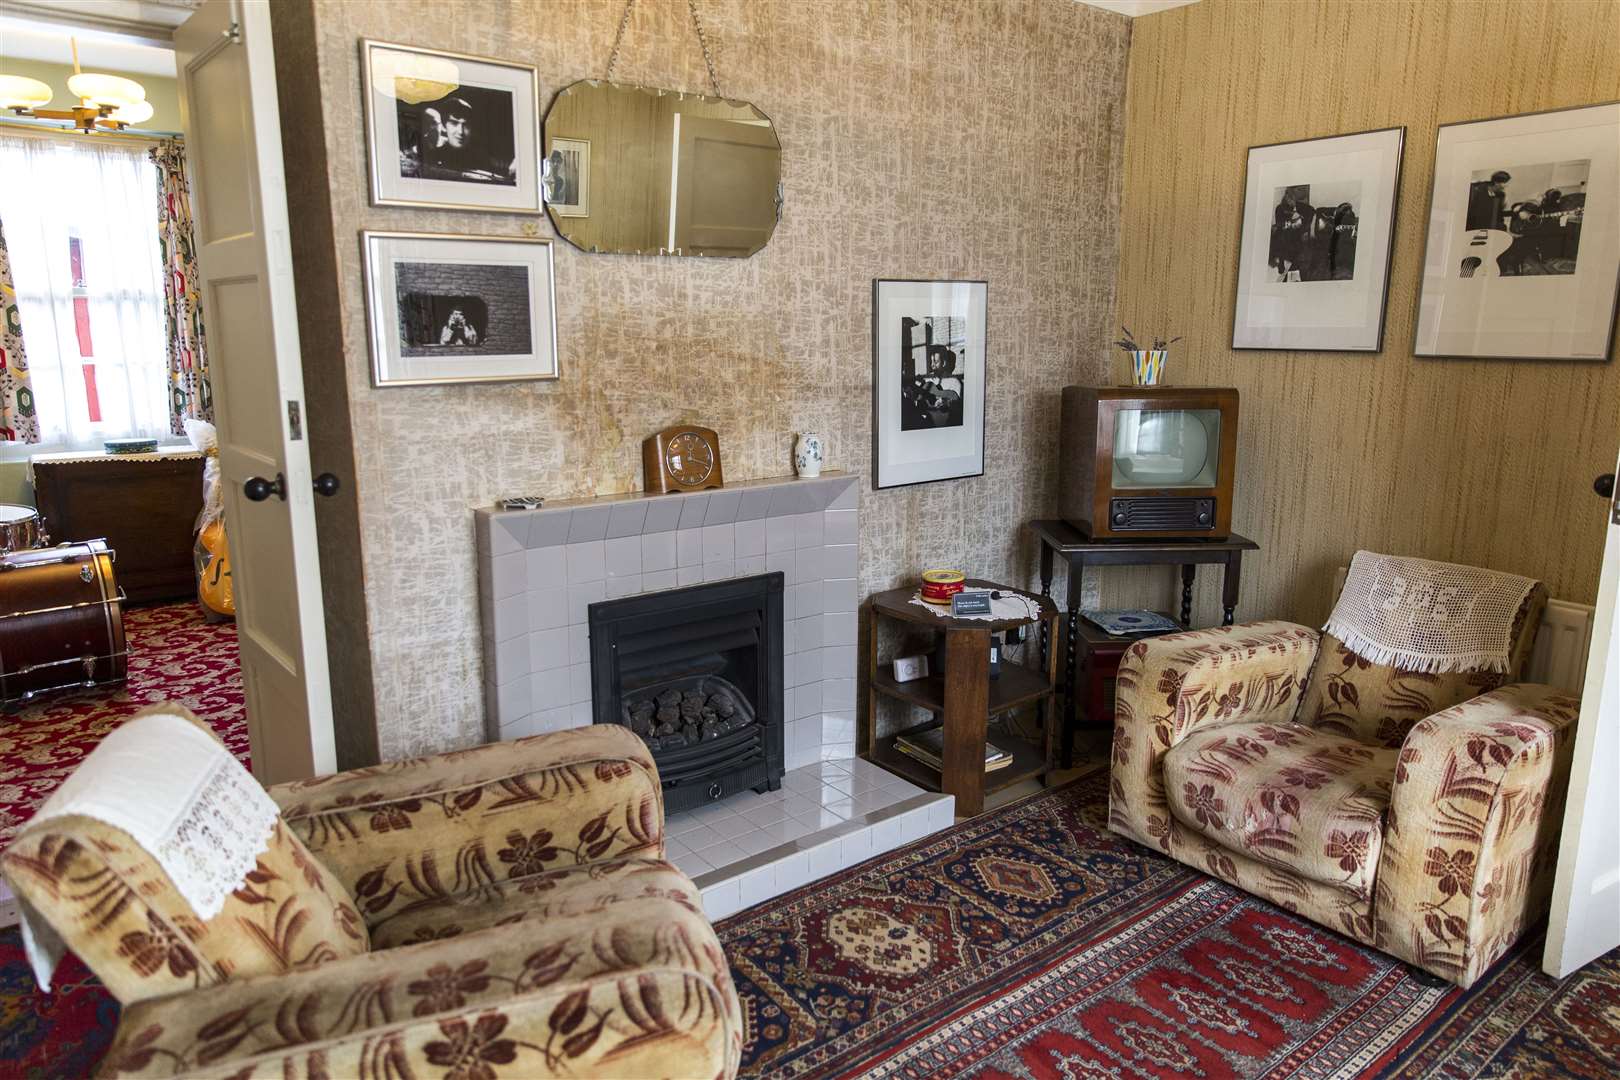 The front room of Sir Paul McCartney’s childhood home on Forthlin Road (Annapurna Mellor/National Trust/PA)